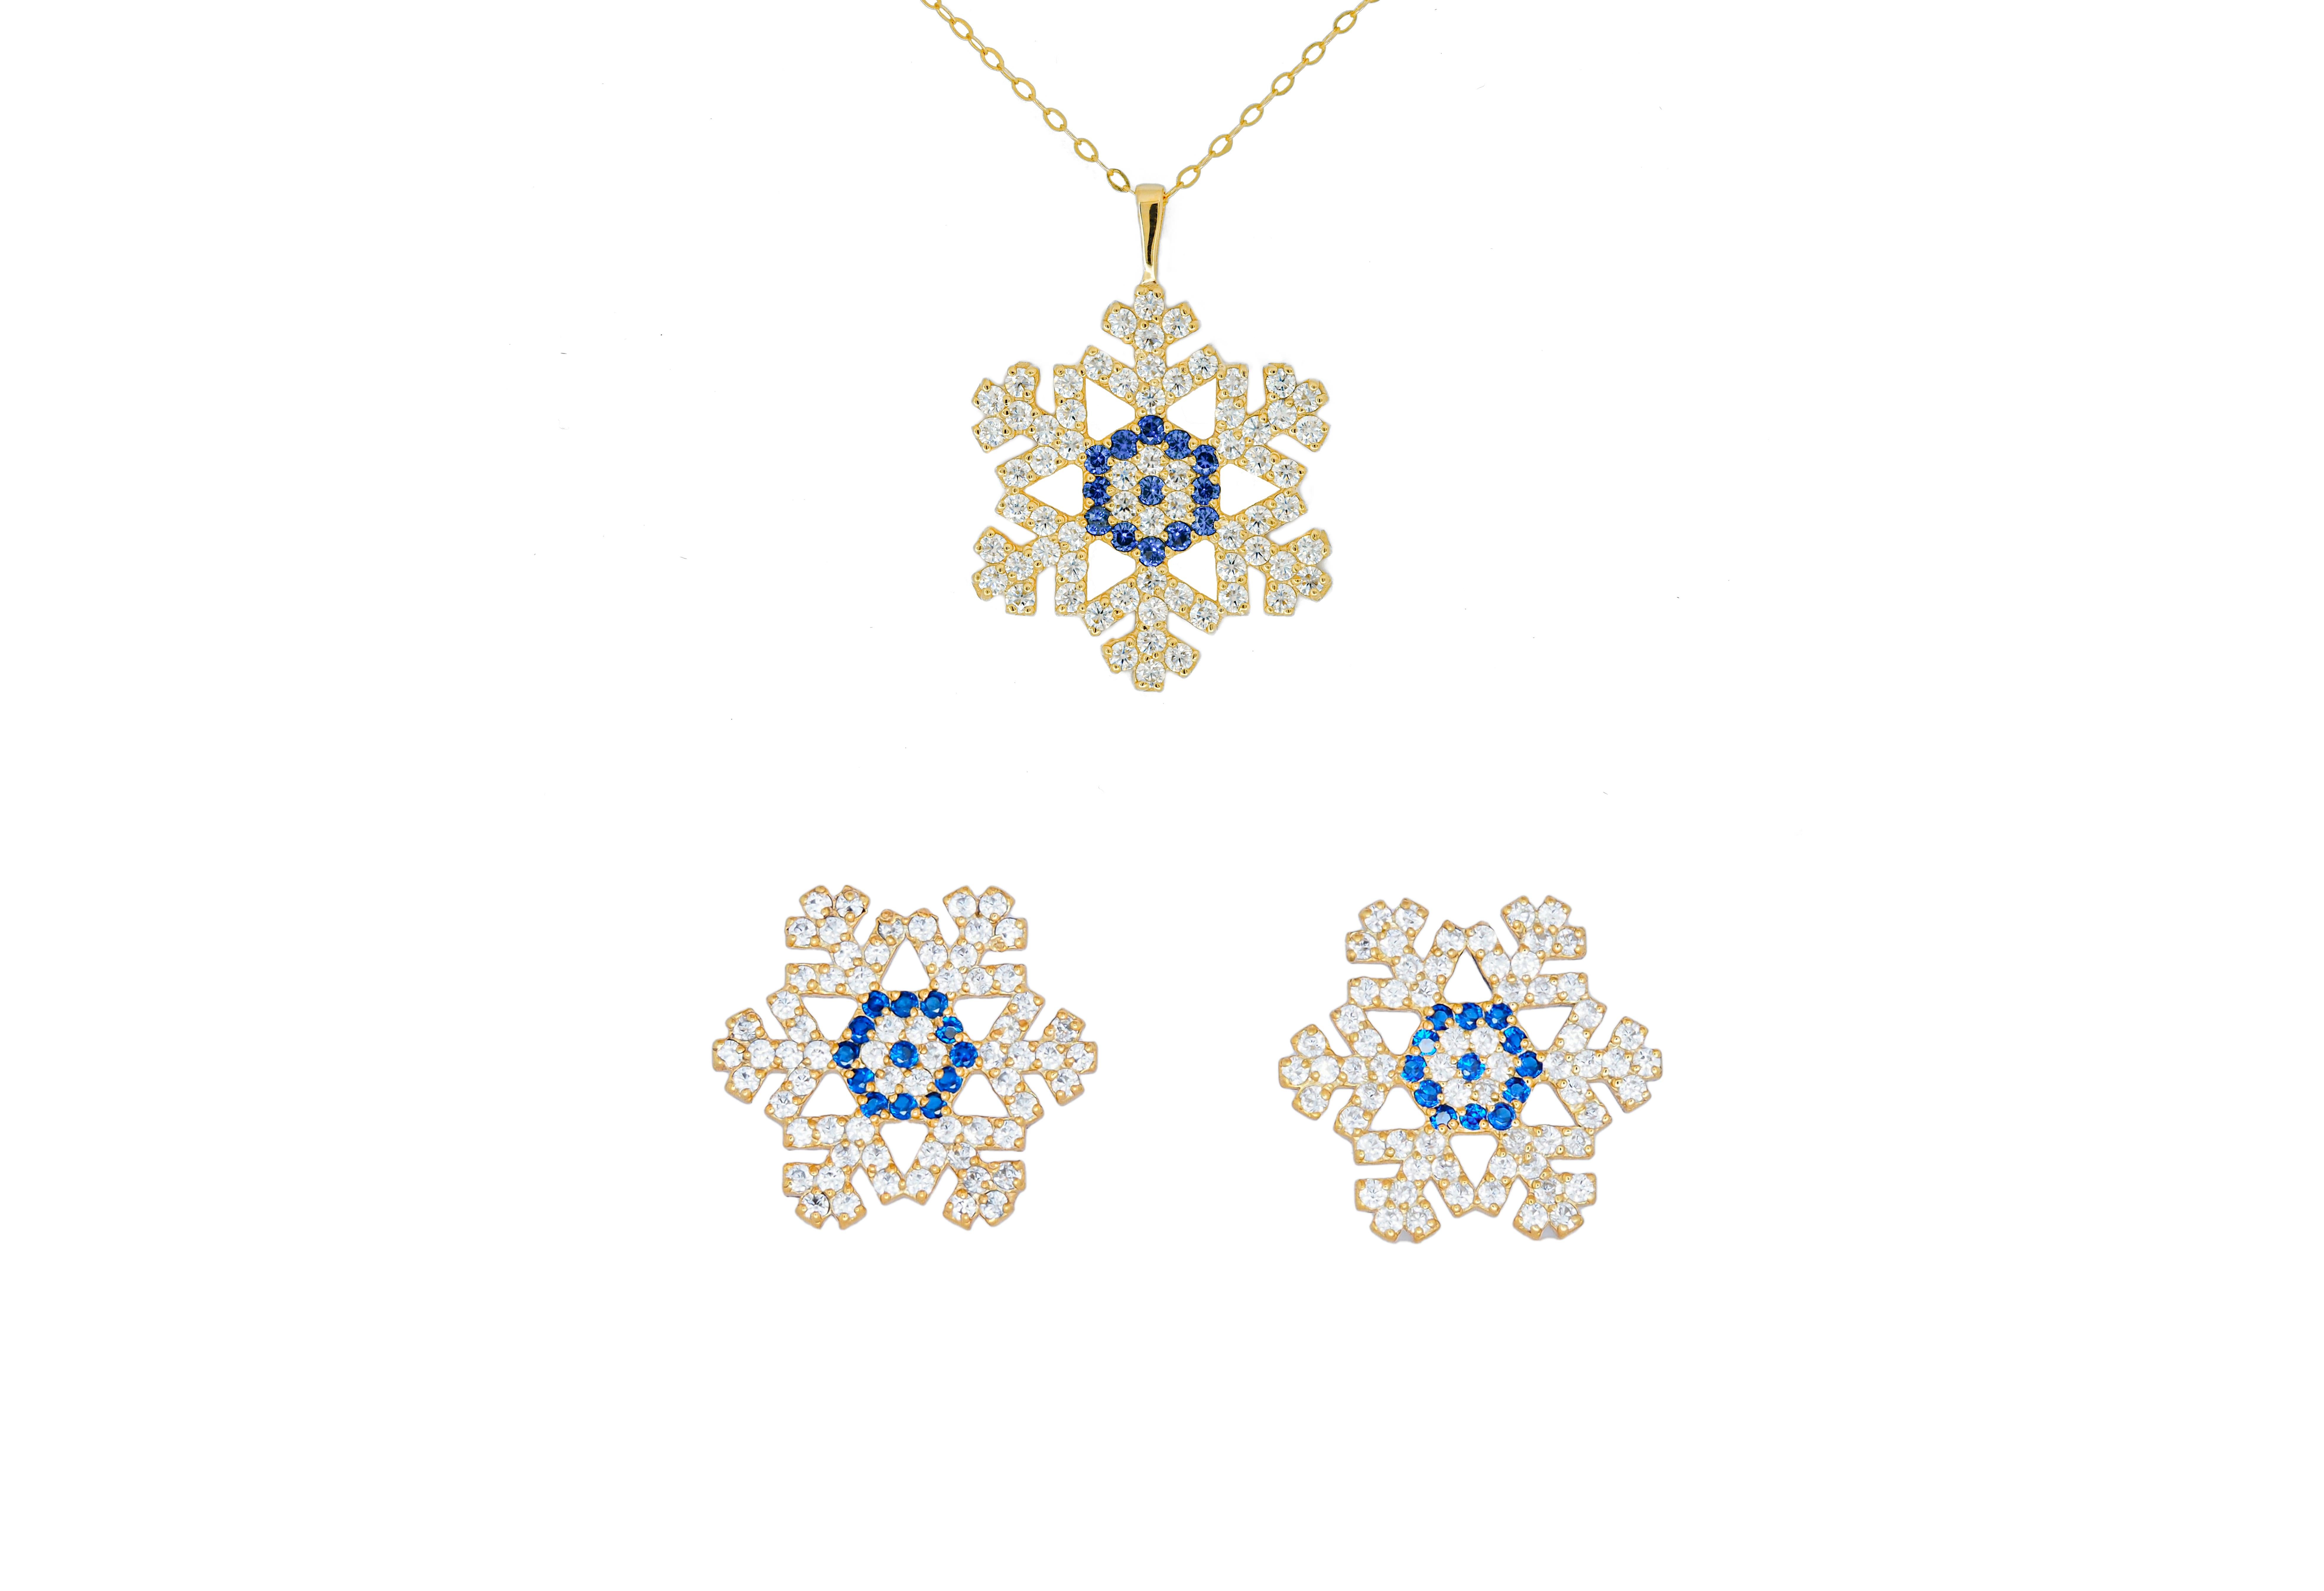 Snowflake set: earrings and pendant necklace in 14k solid gold.  Snowflake 14k gold earrings studs. Snowflake charm necklace in 14k solid gold. Gold Snowflake Pendant. Christmas Gift for her. Snow queen pendant necklace and earrings. Winter jewelry